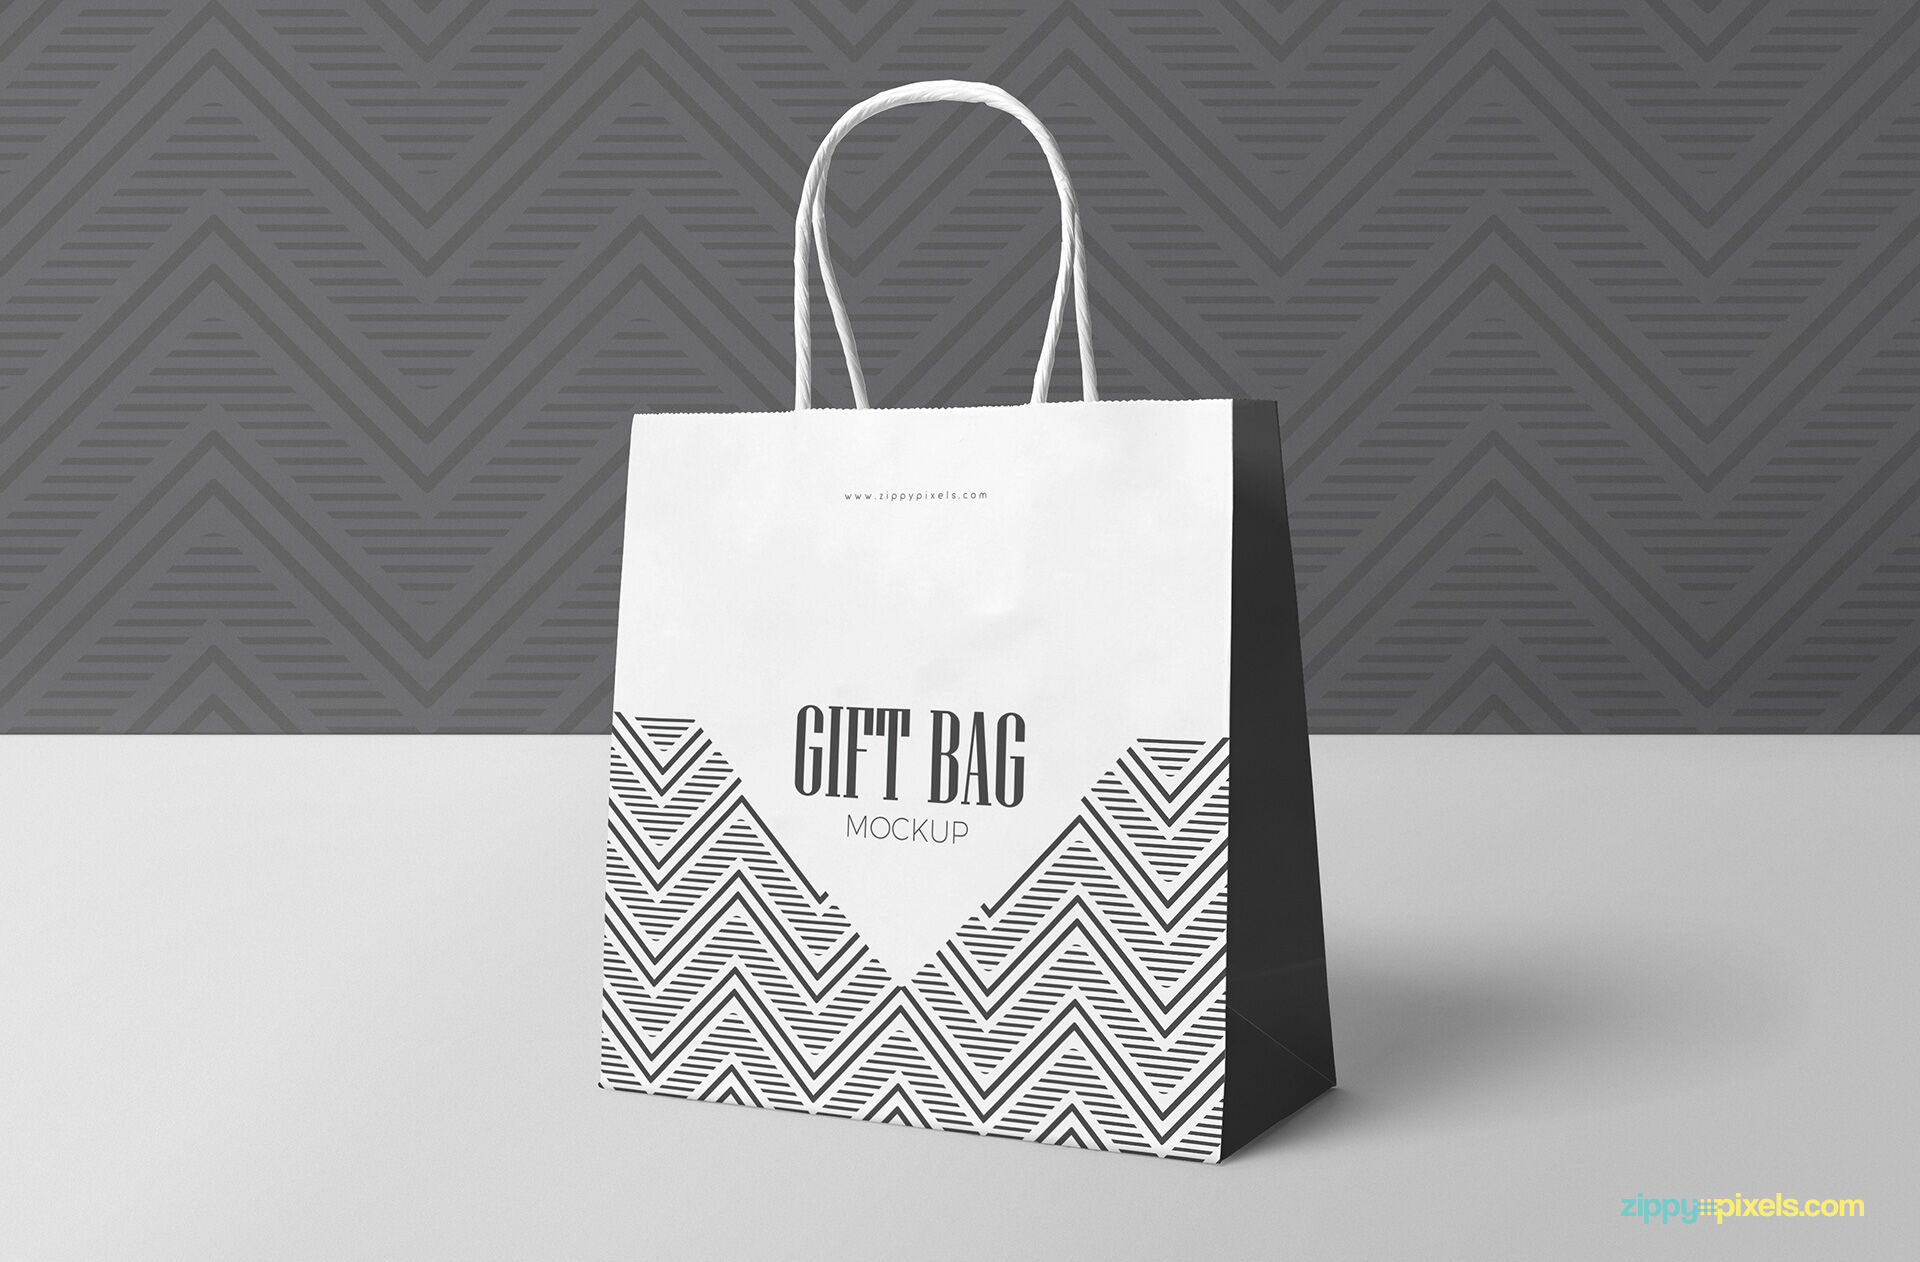 Single Gift Bag Mockup With Front and Side View FREE PSD